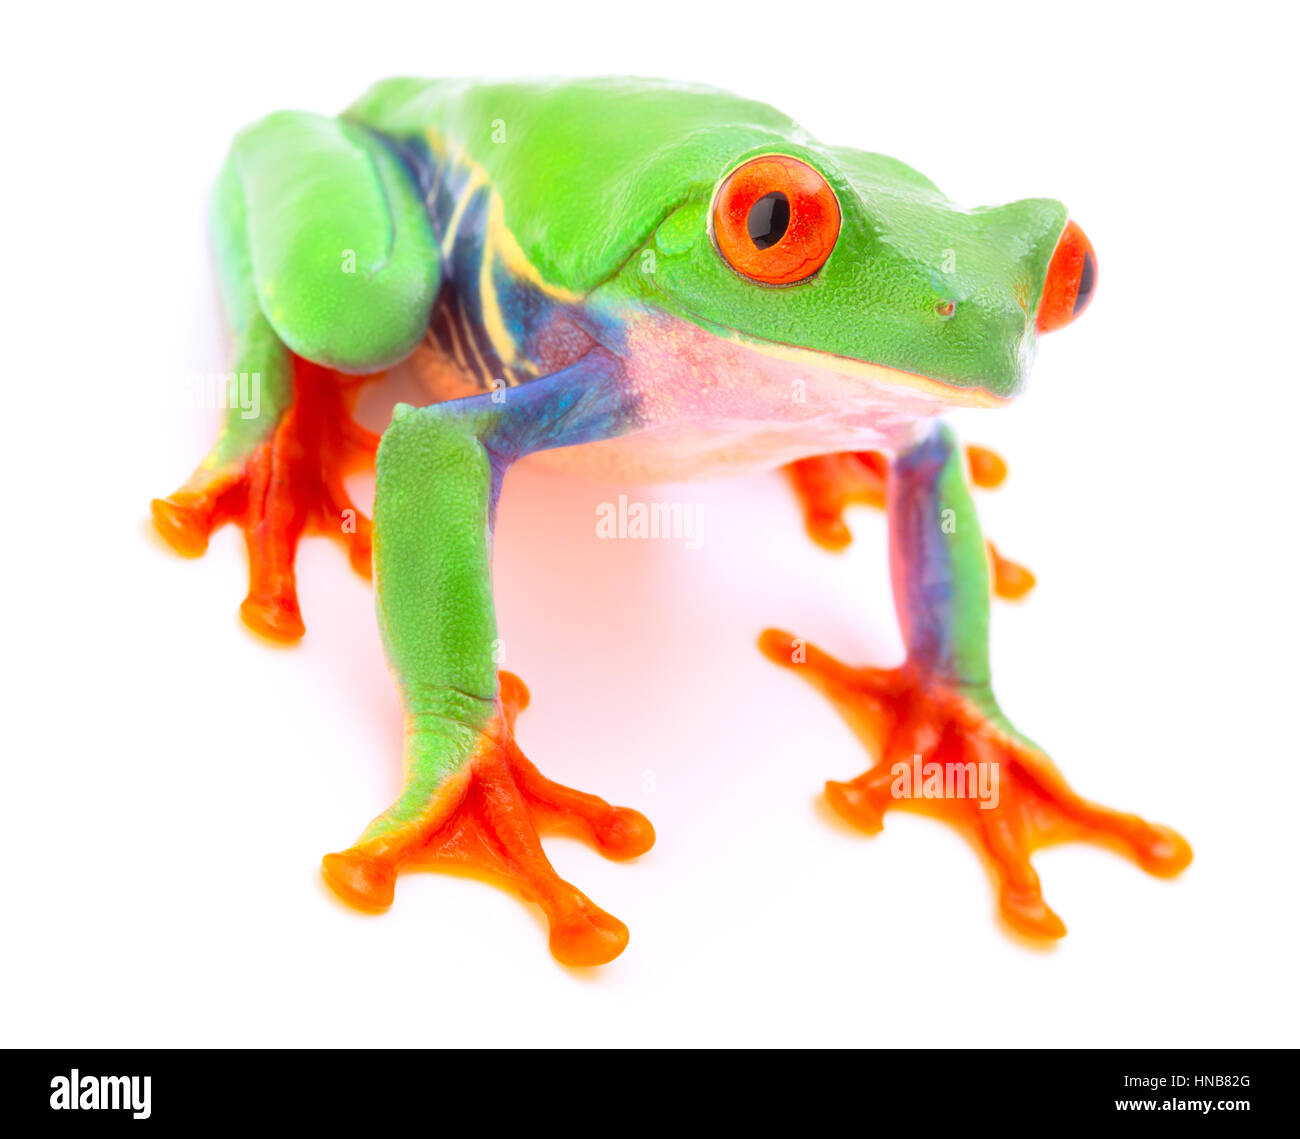 Red eyed monkey tree frog from the tropical rain forest of Costa Rica and Panama. A cute funny exotic animal with vibrant eyes isolated on a white bac Stock Photo